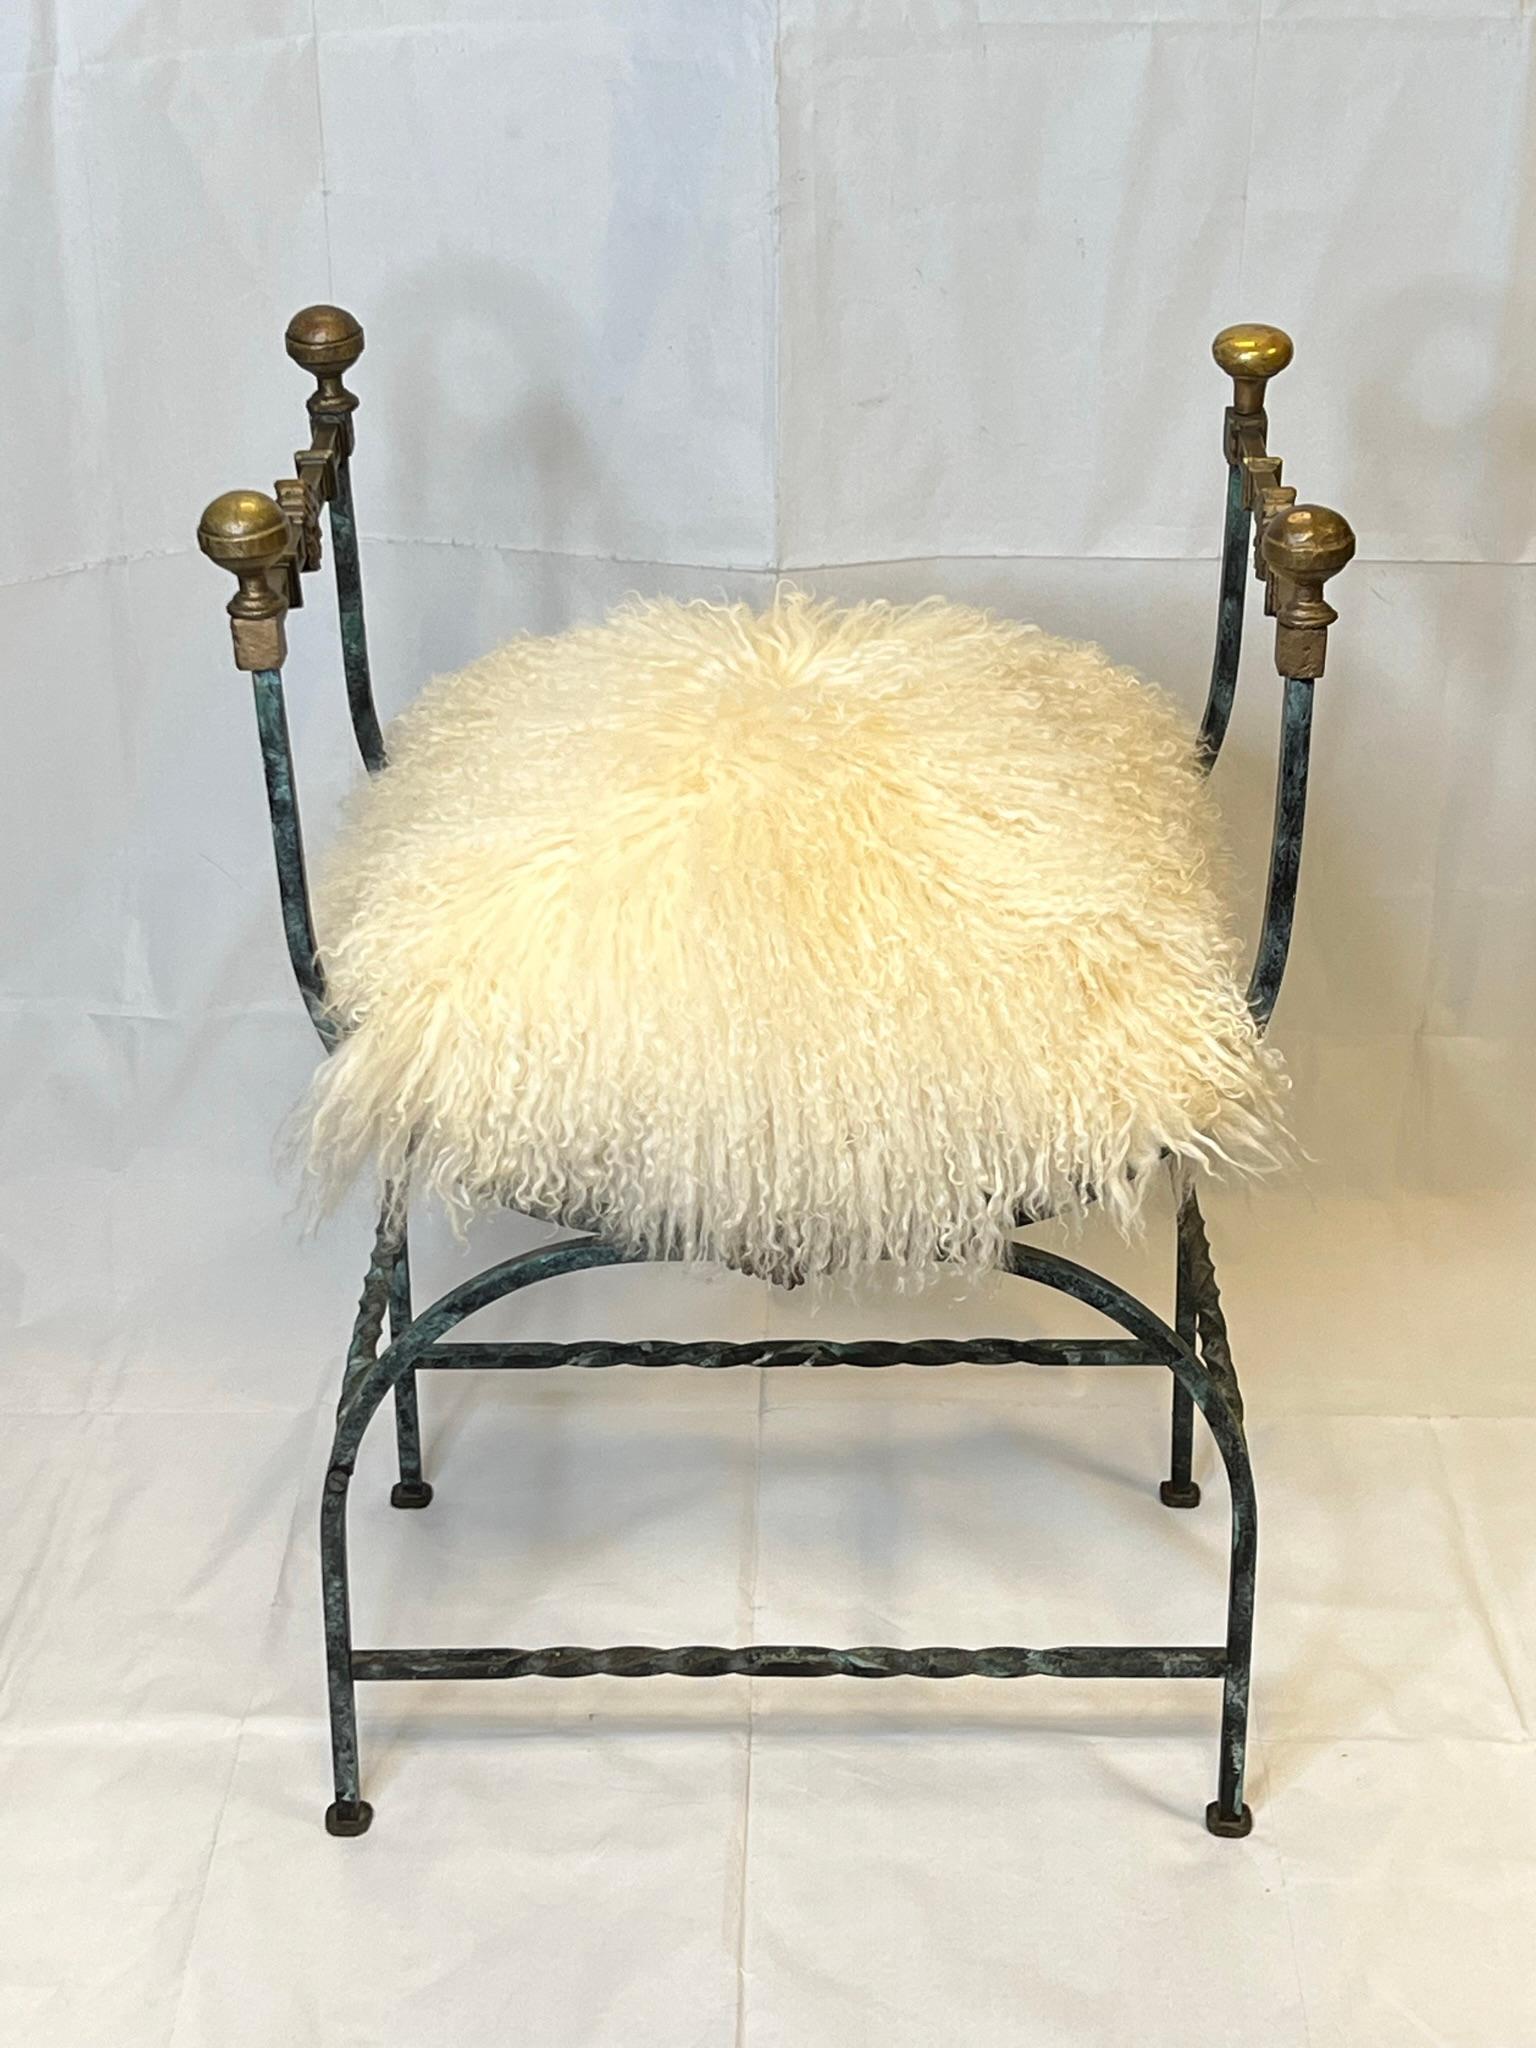 Wrought Iron Bench in Renaissance Style with Sheepskin Seat Cushion 8